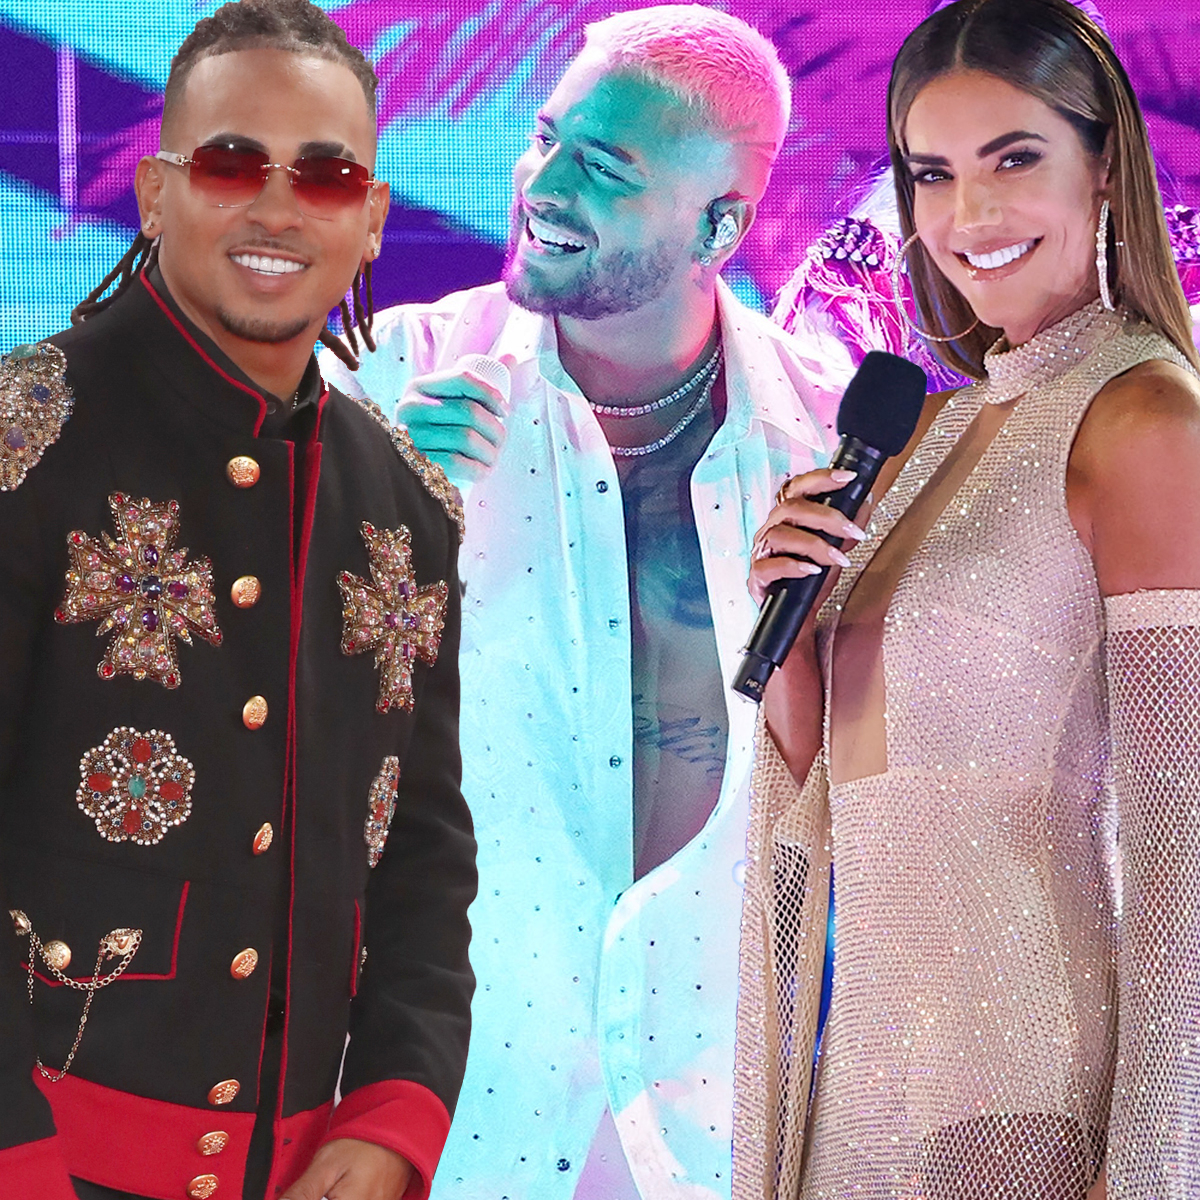 Ozuna Music 2020 - Latin Music Star Ozuna Honoured With Four Record Titles For His Music Achievements Guinness World Records - Anuel, ozuna producer gaby music wins bmi contemporary songwriter of the year.